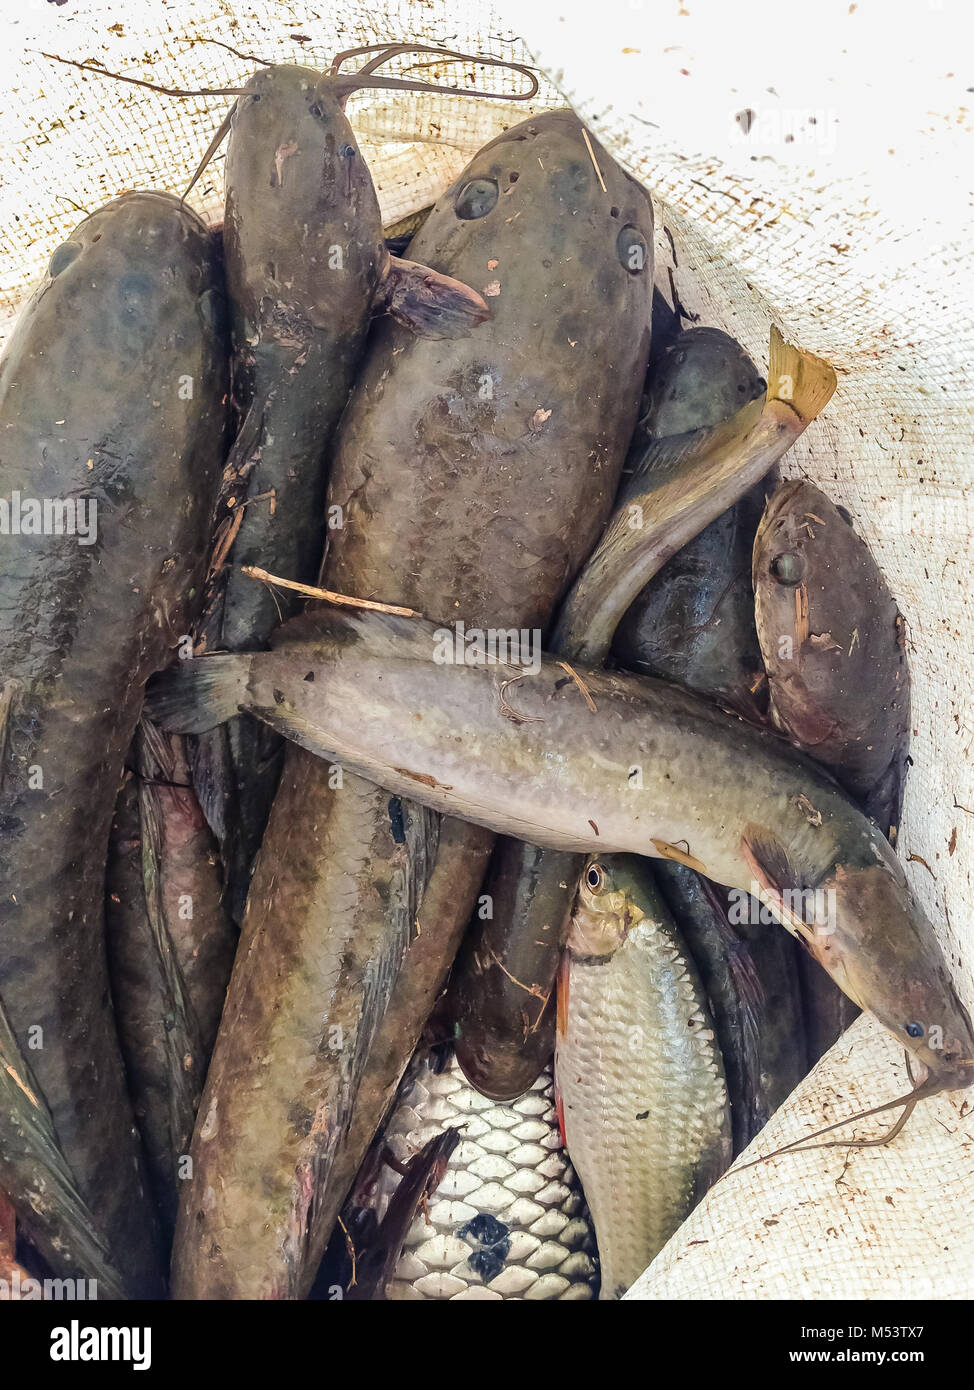 Catching snake head fish including catfish in plastic bag Stock Photo